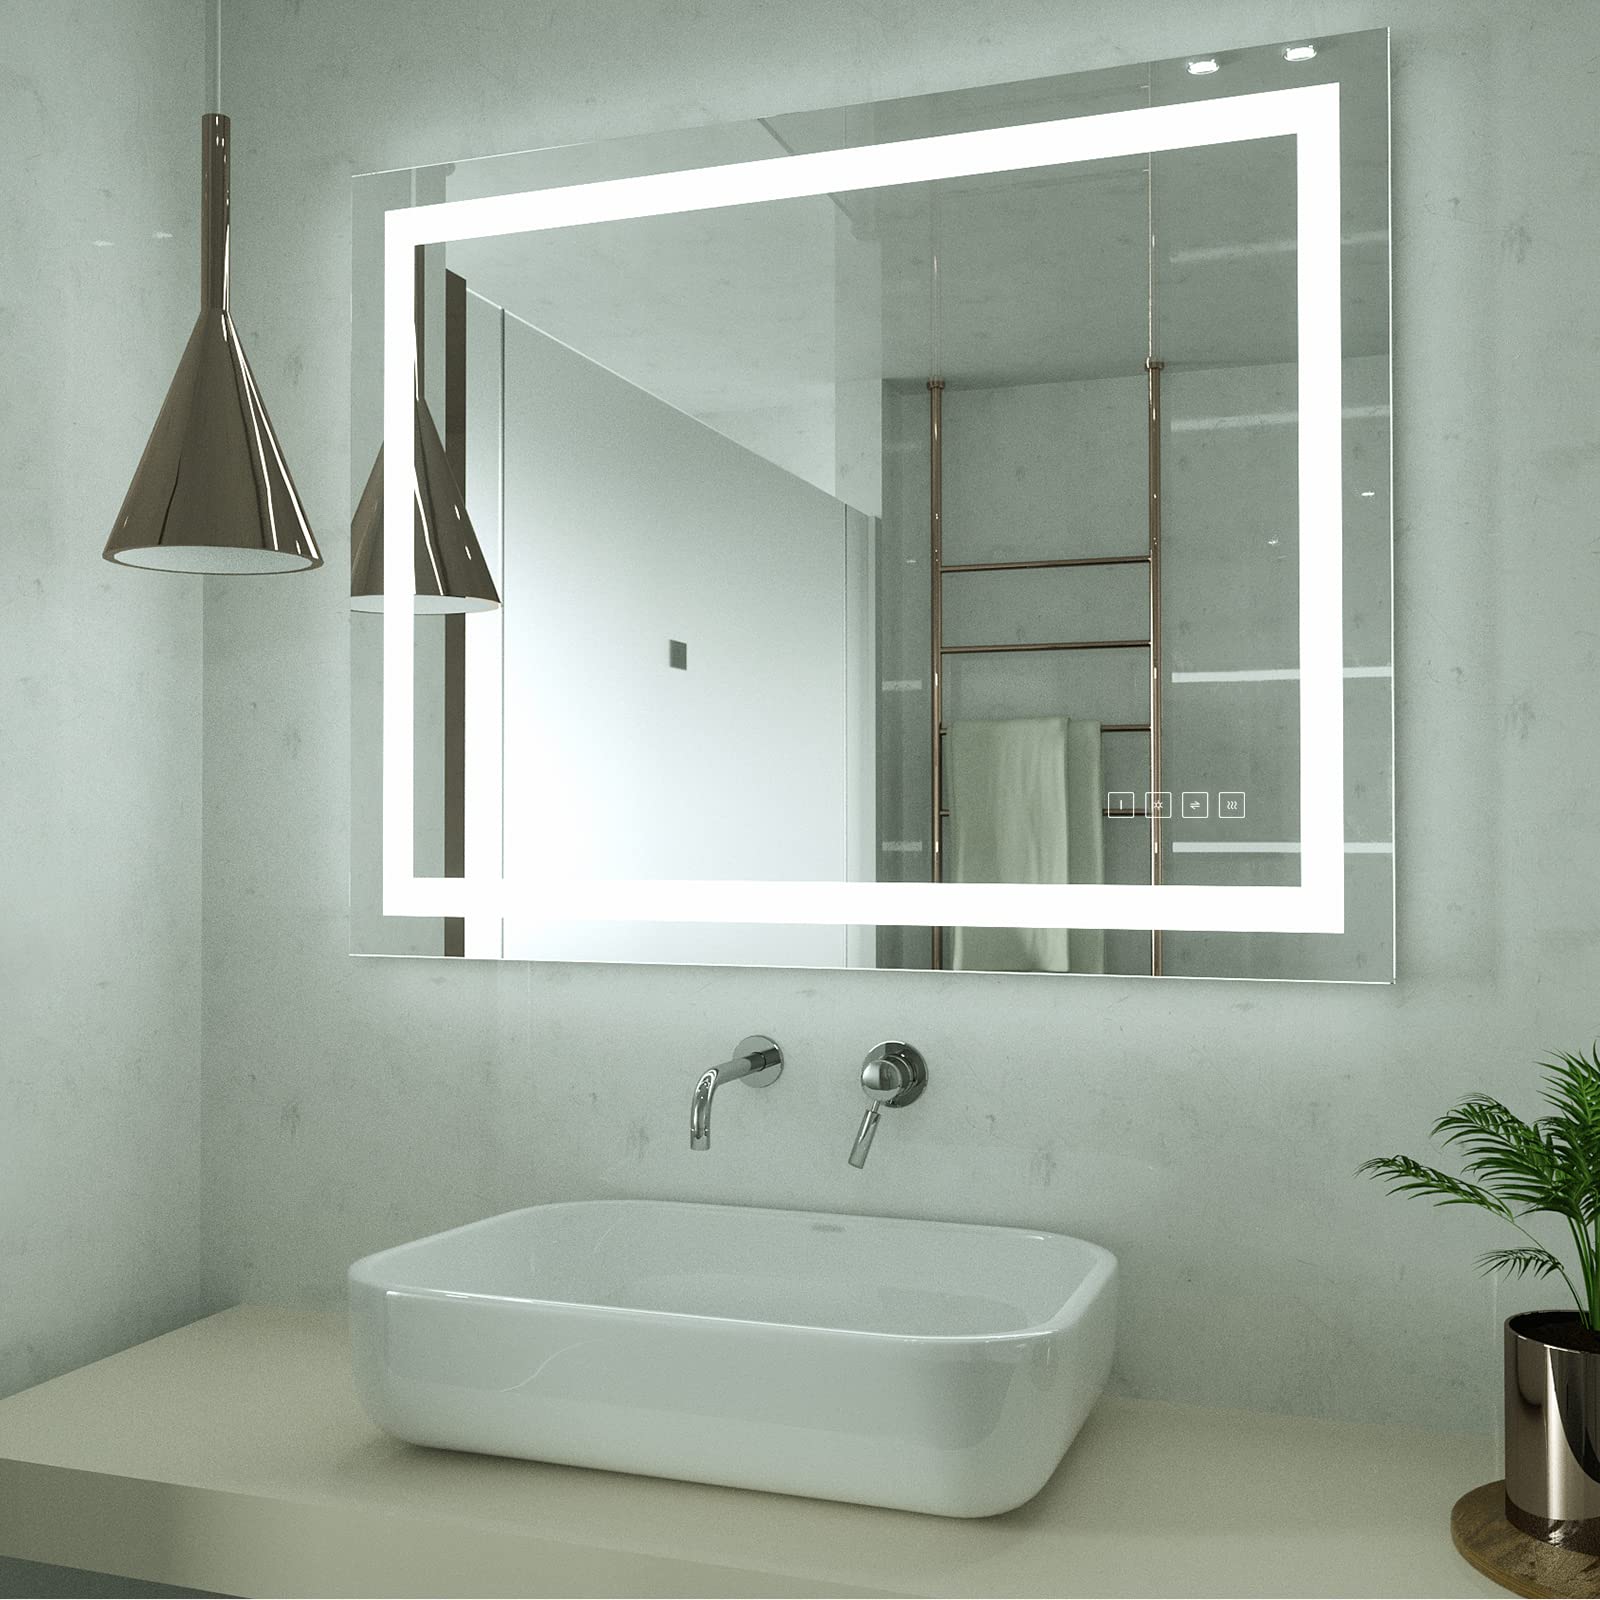 HAUSCHEN HOME 32 x 40 inch LED Lighted Bathroom Mirror, Wall Mounted Dimmable Makeup Vanity Mirror, Anti-Fog Mirror, 3-Color Adjustable Warm/Natura...